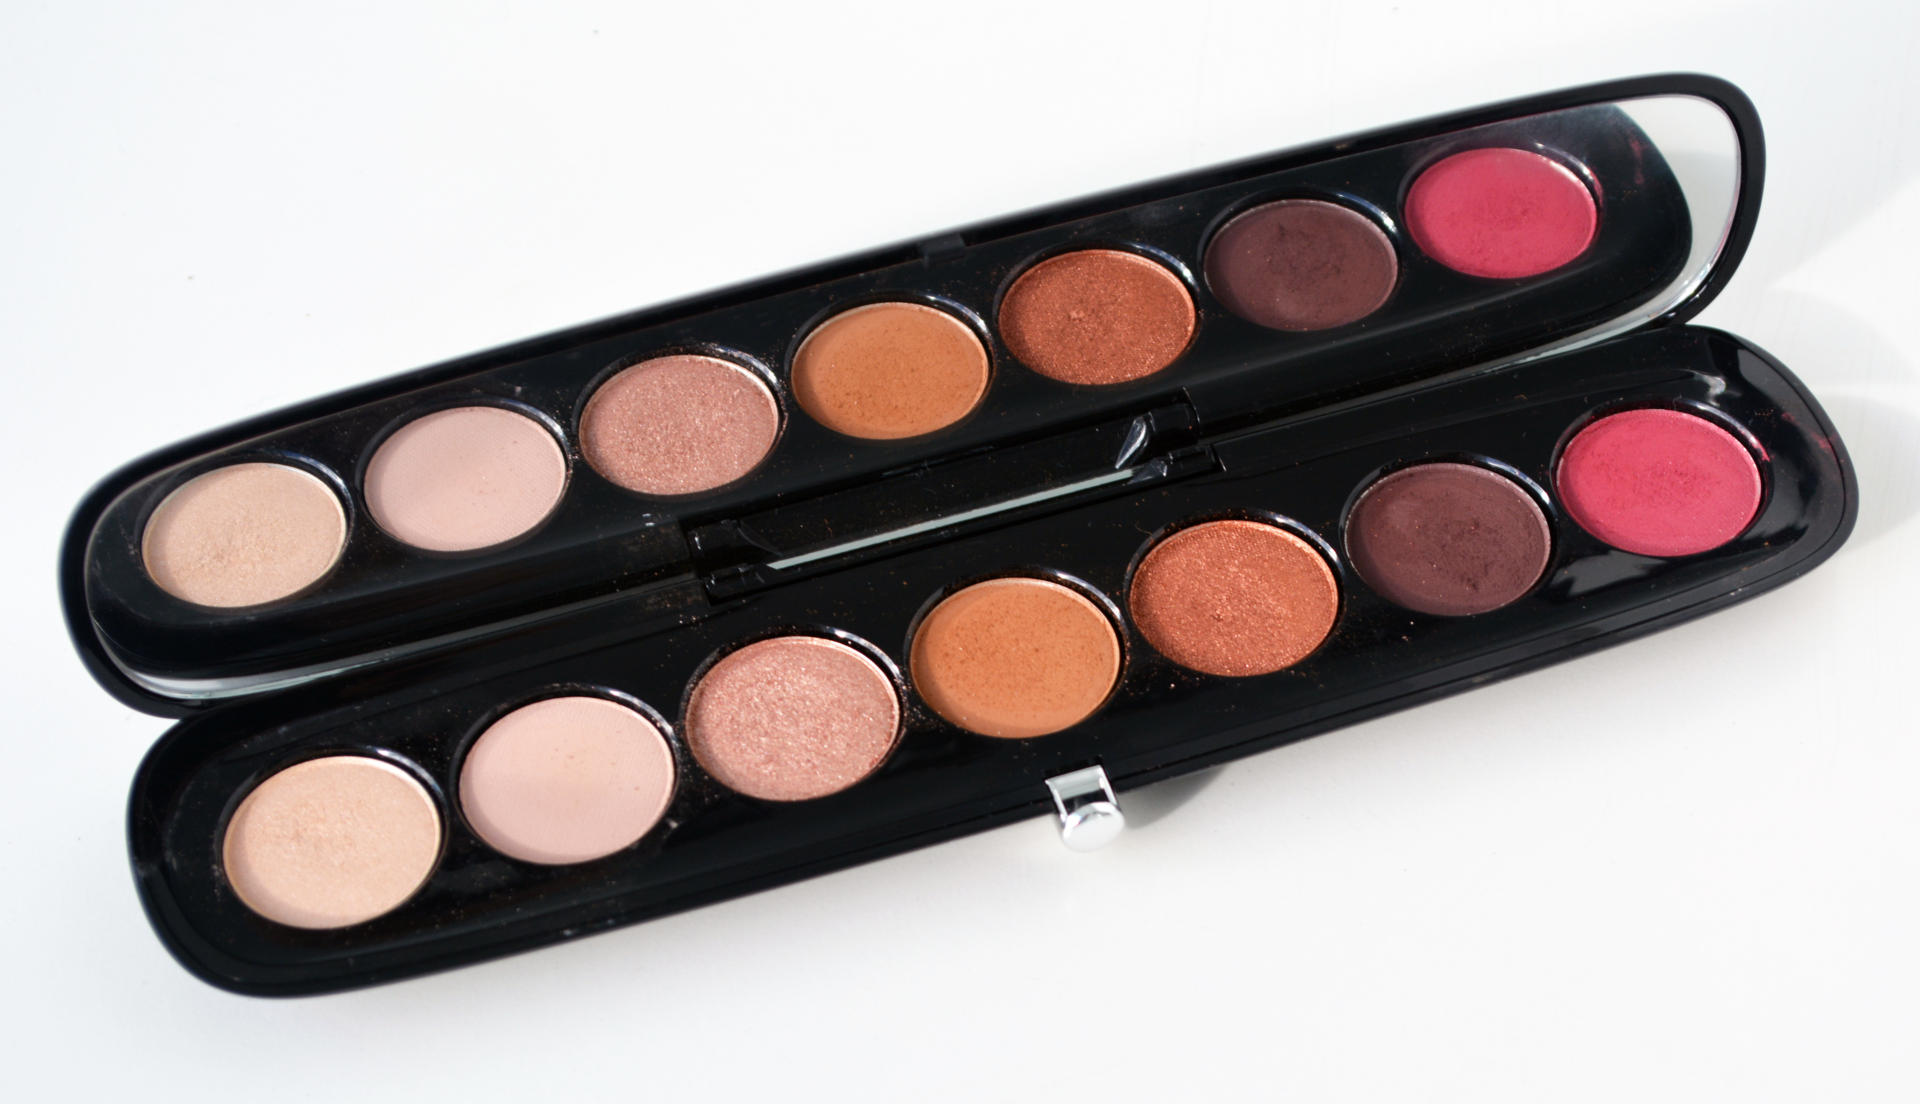 Marc Jacobs Eye-Conic Multi-Finish Eyeshadow Palette in Scandalust